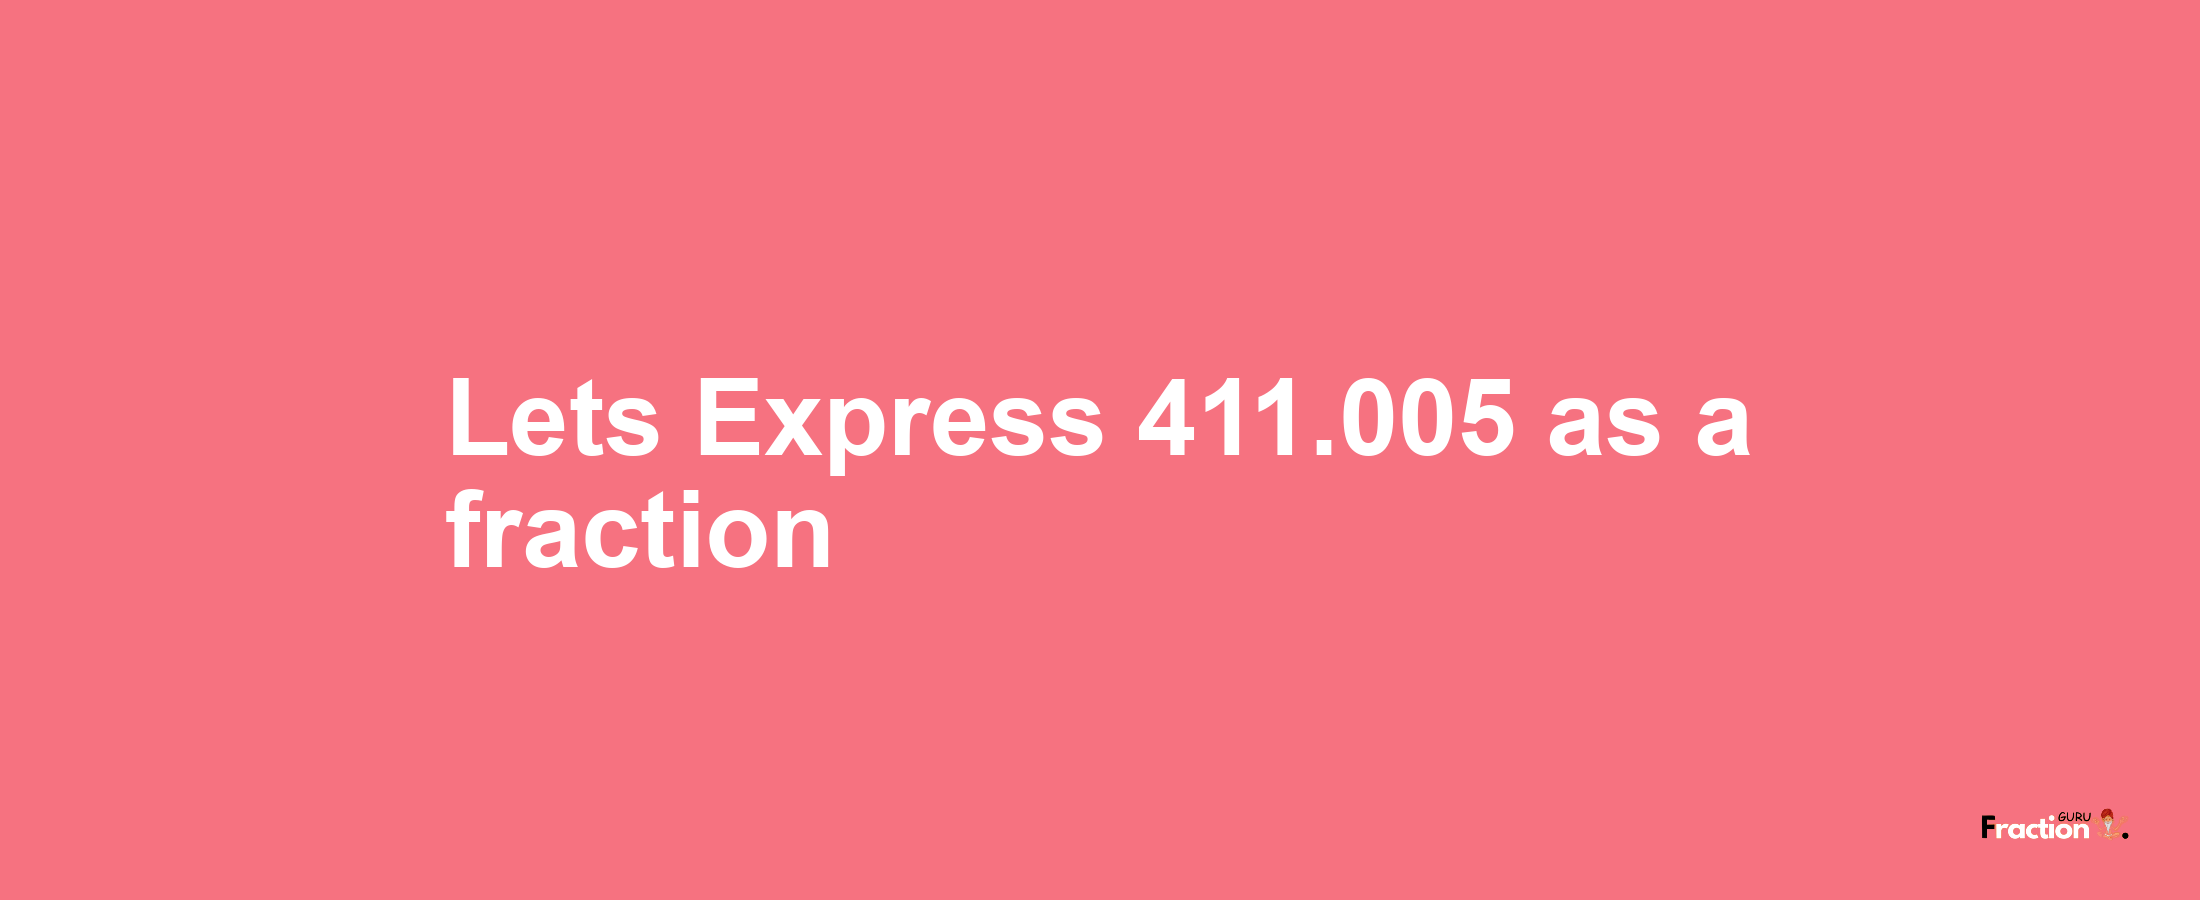 Lets Express 411.005 as afraction